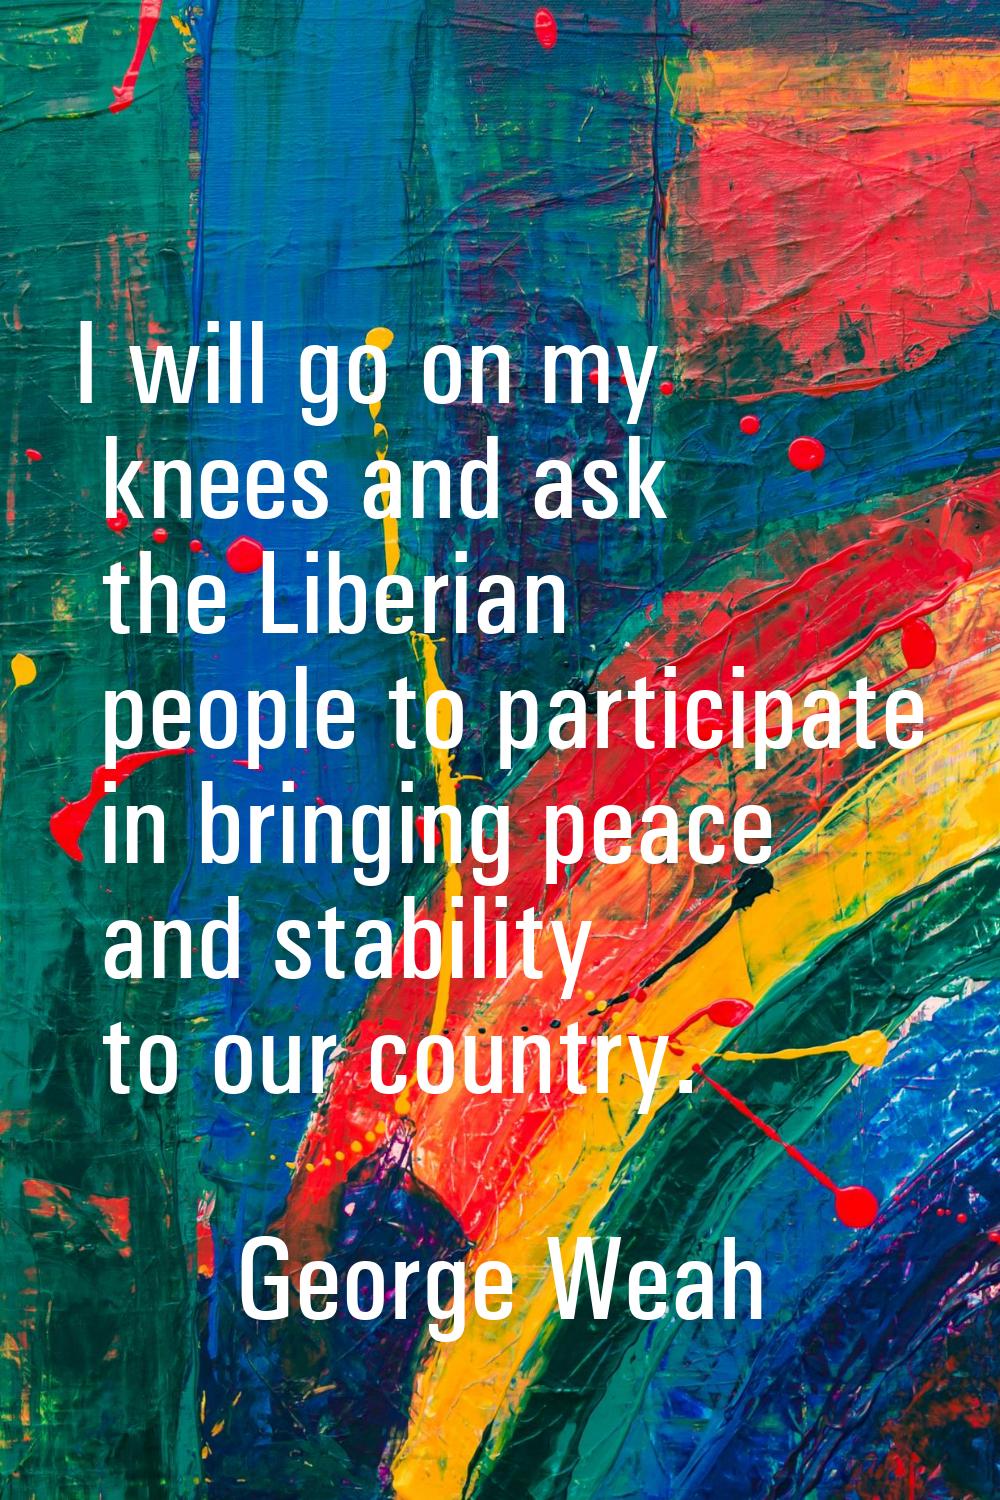 I will go on my knees and ask the Liberian people to participate in bringing peace and stability to